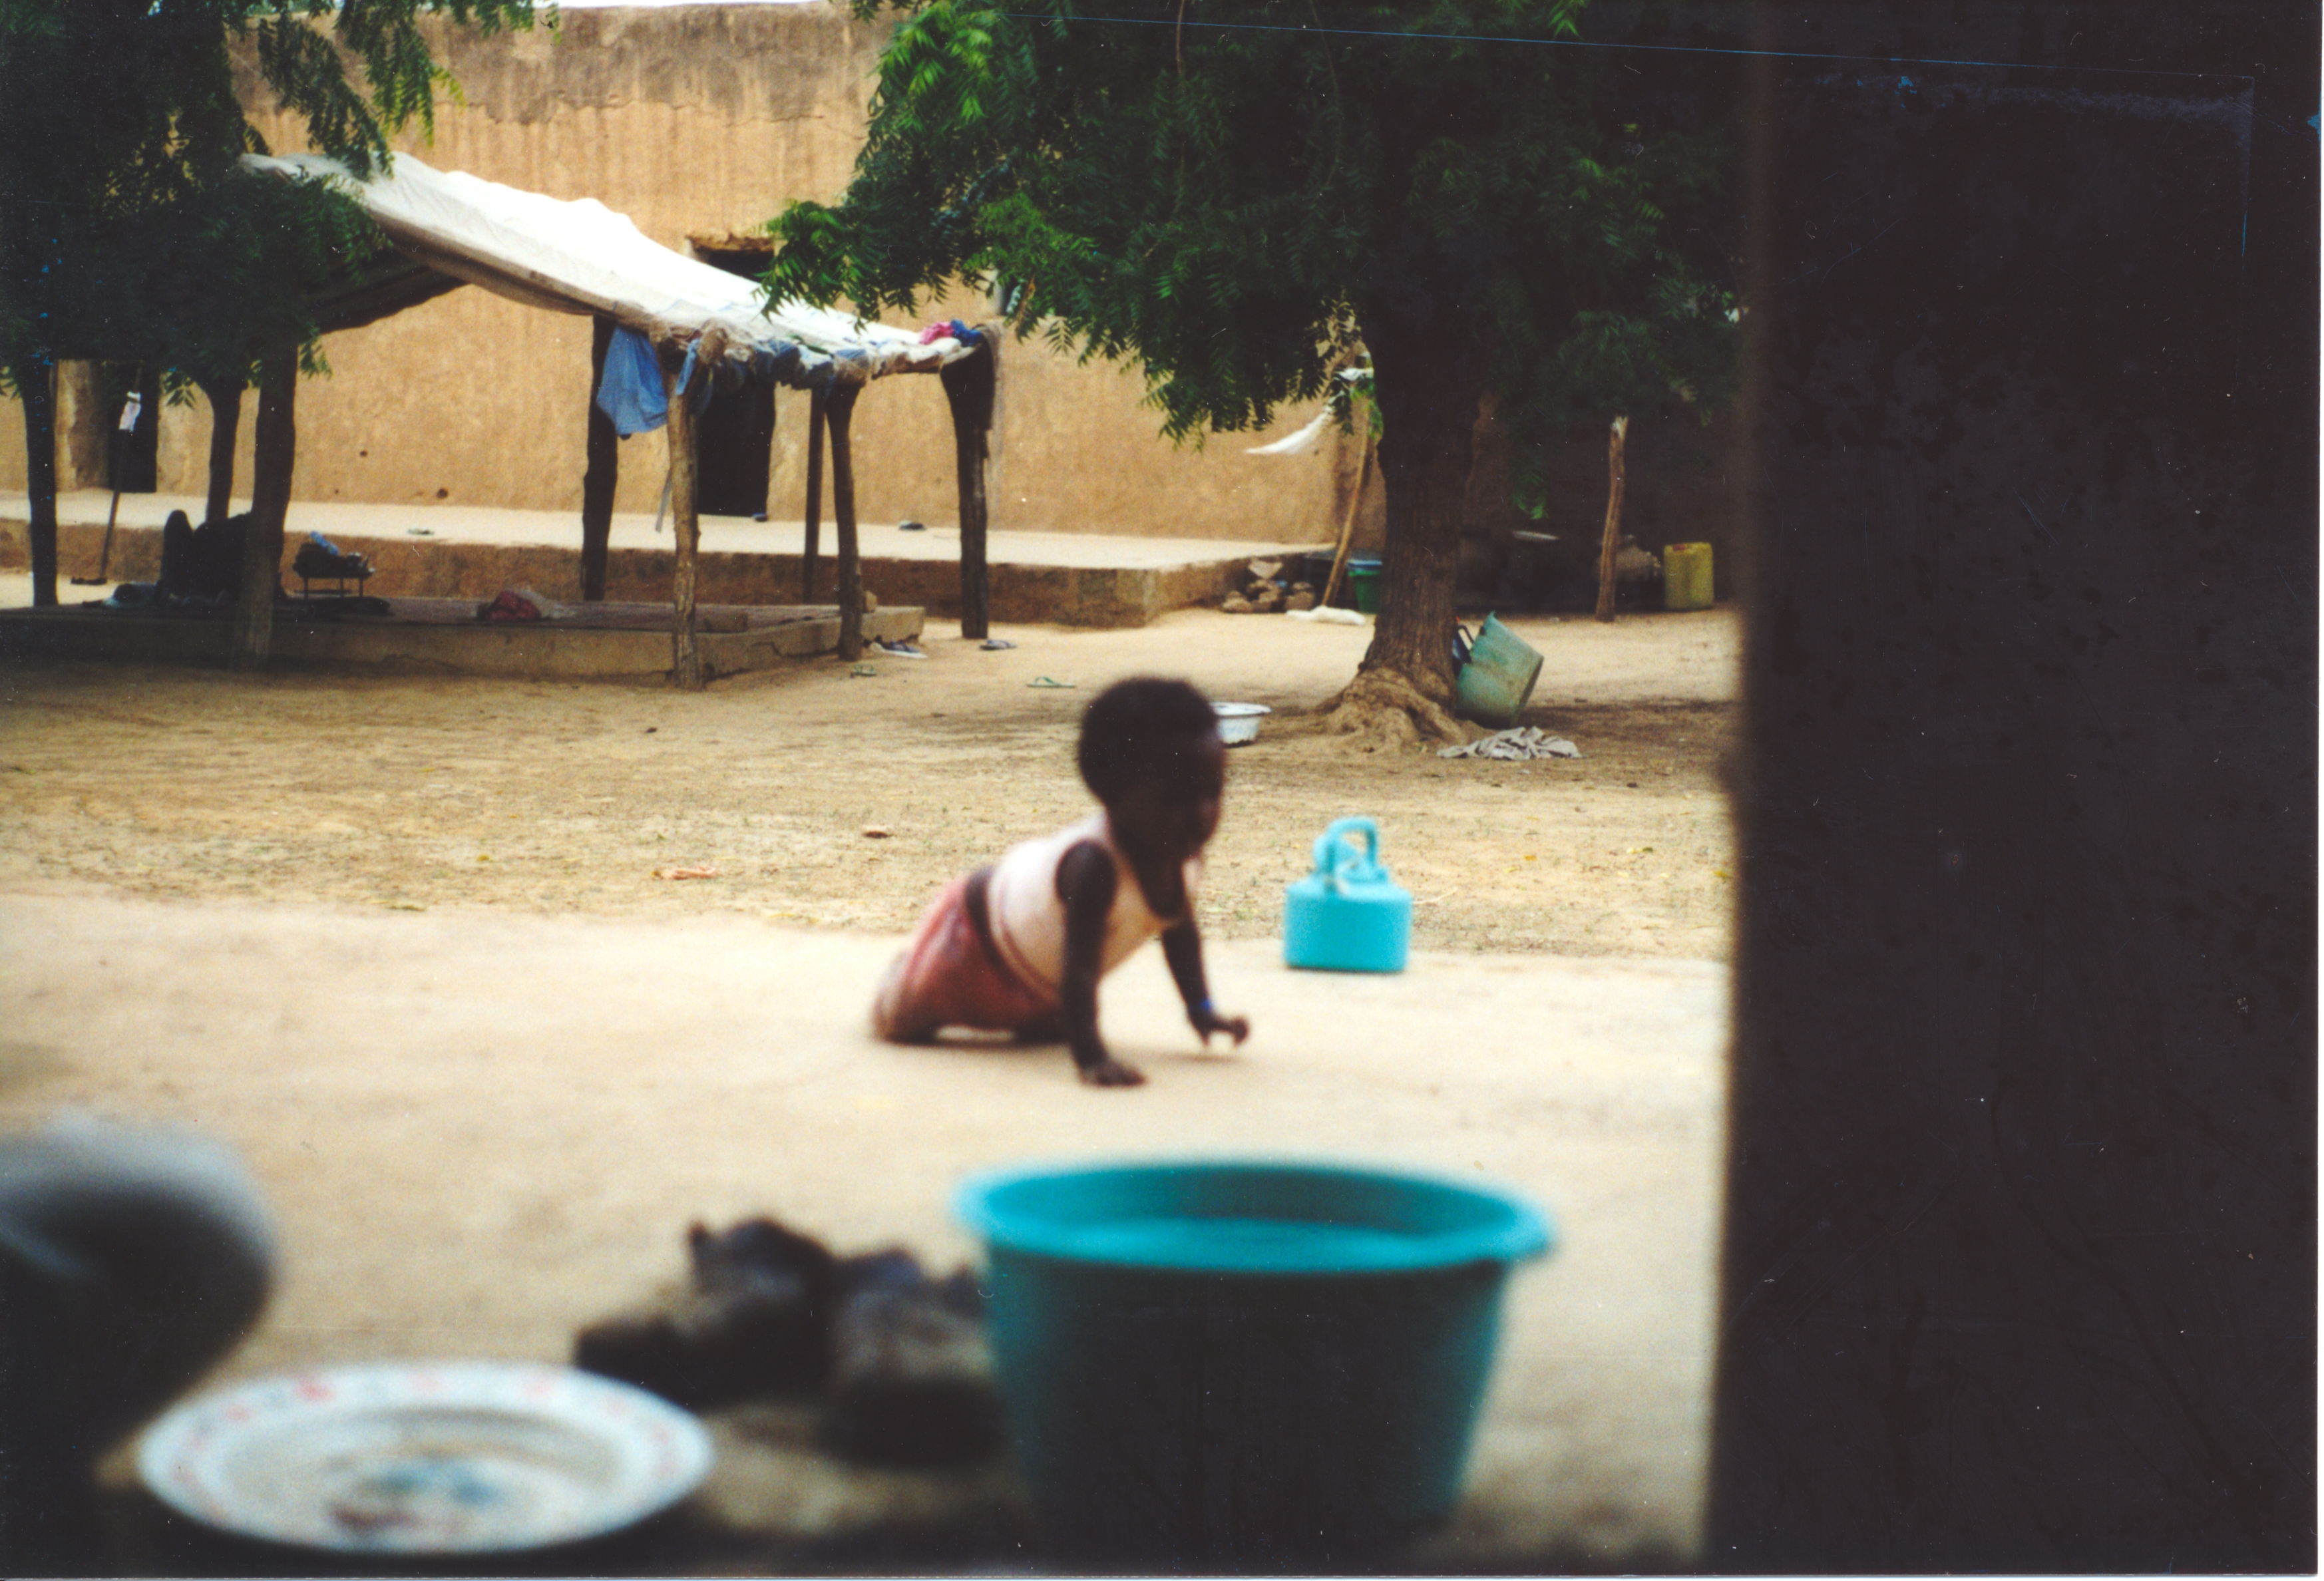 A baby crawls on a cement platform in family compound. A mud-brick building is in the background. In front of that are two trees and a pavilion for shade.